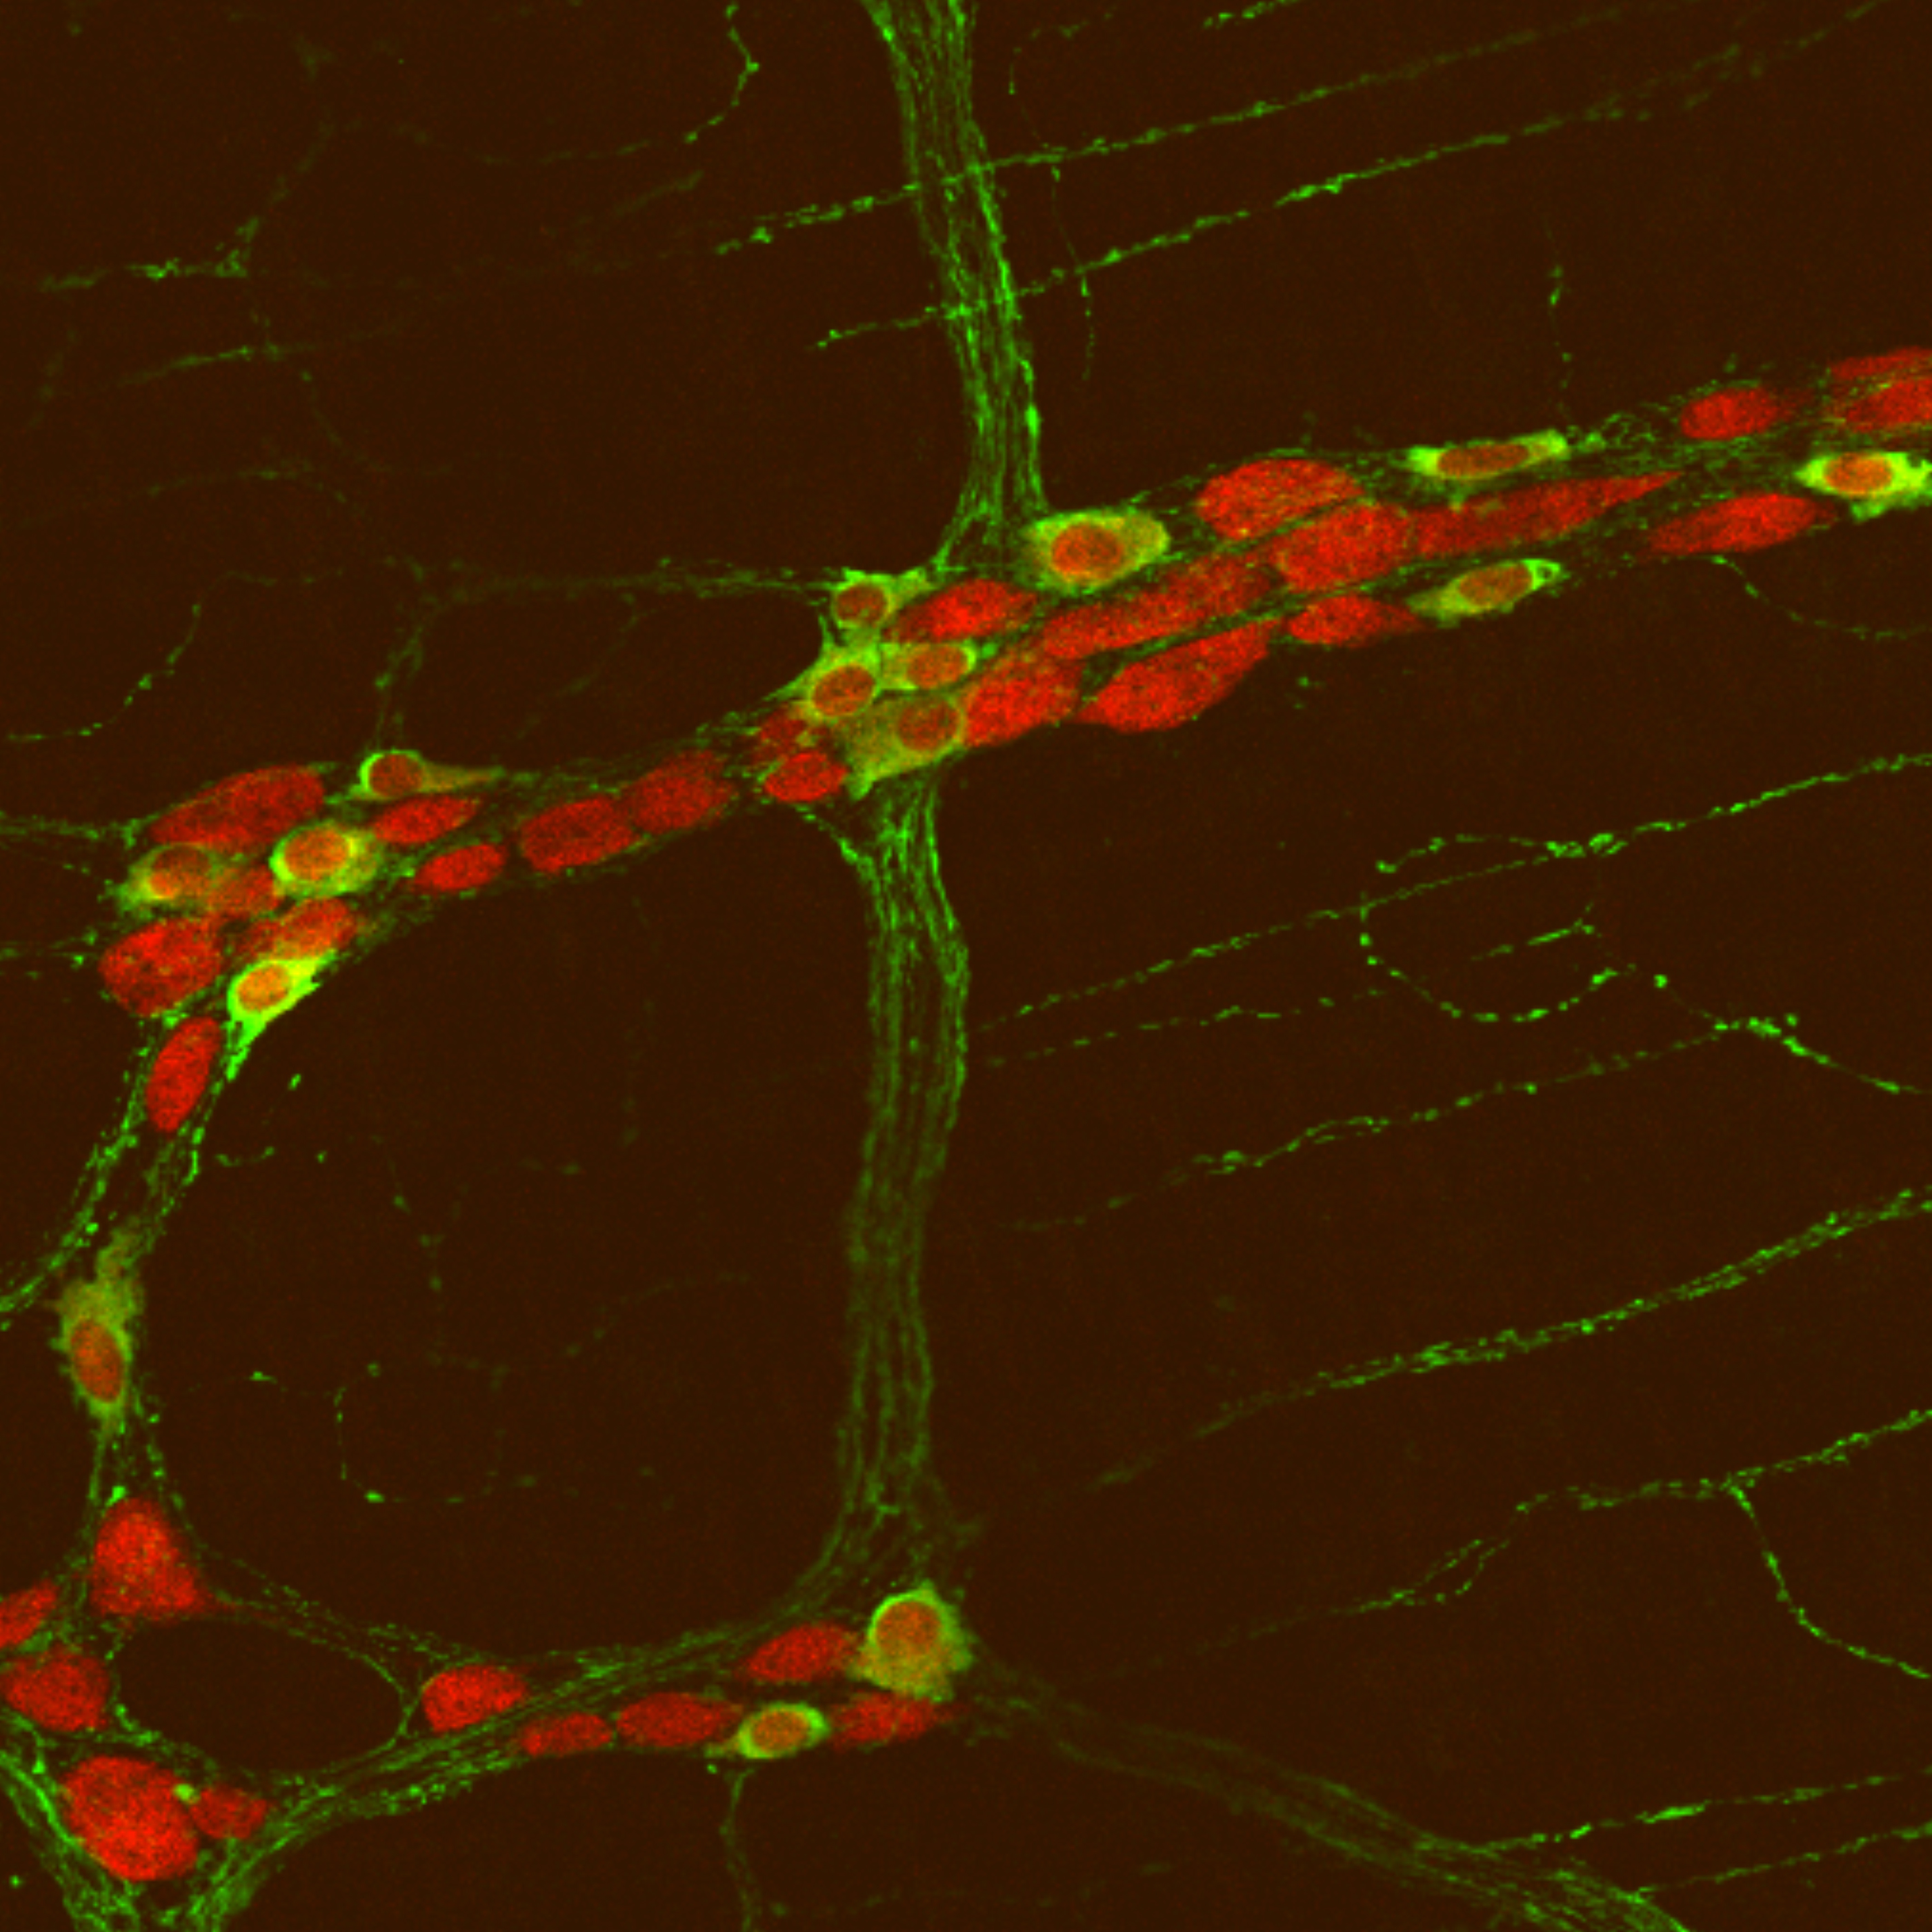 An image showing neurons in the gut of a mouse with the autism-related gene mutation. The study found mice with the mutation had more neurons in the small intestine.